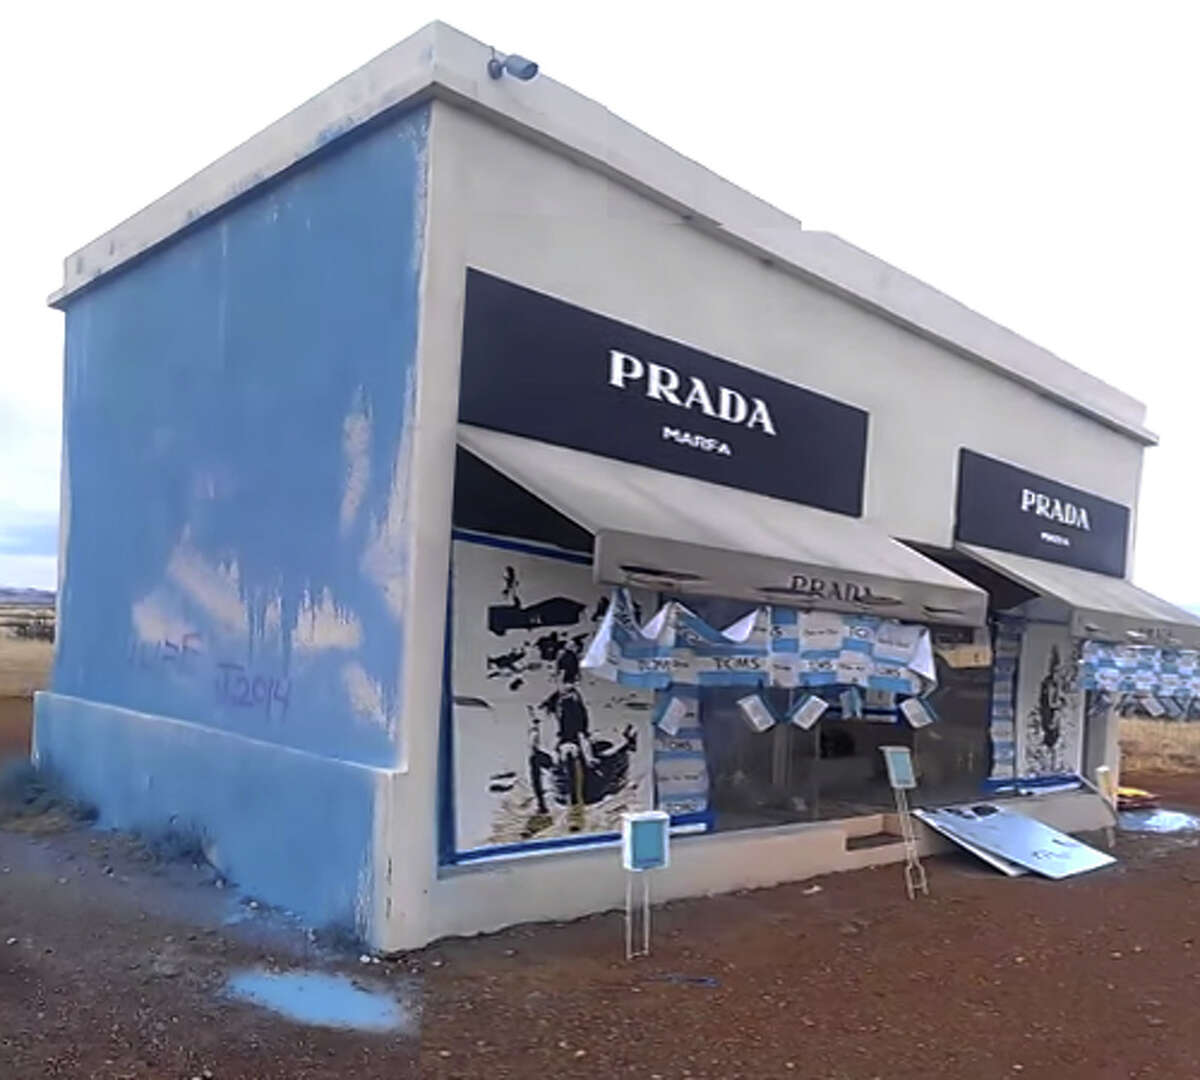 Prada Marfa vandal who turned store into TOMS protest pleads guilty